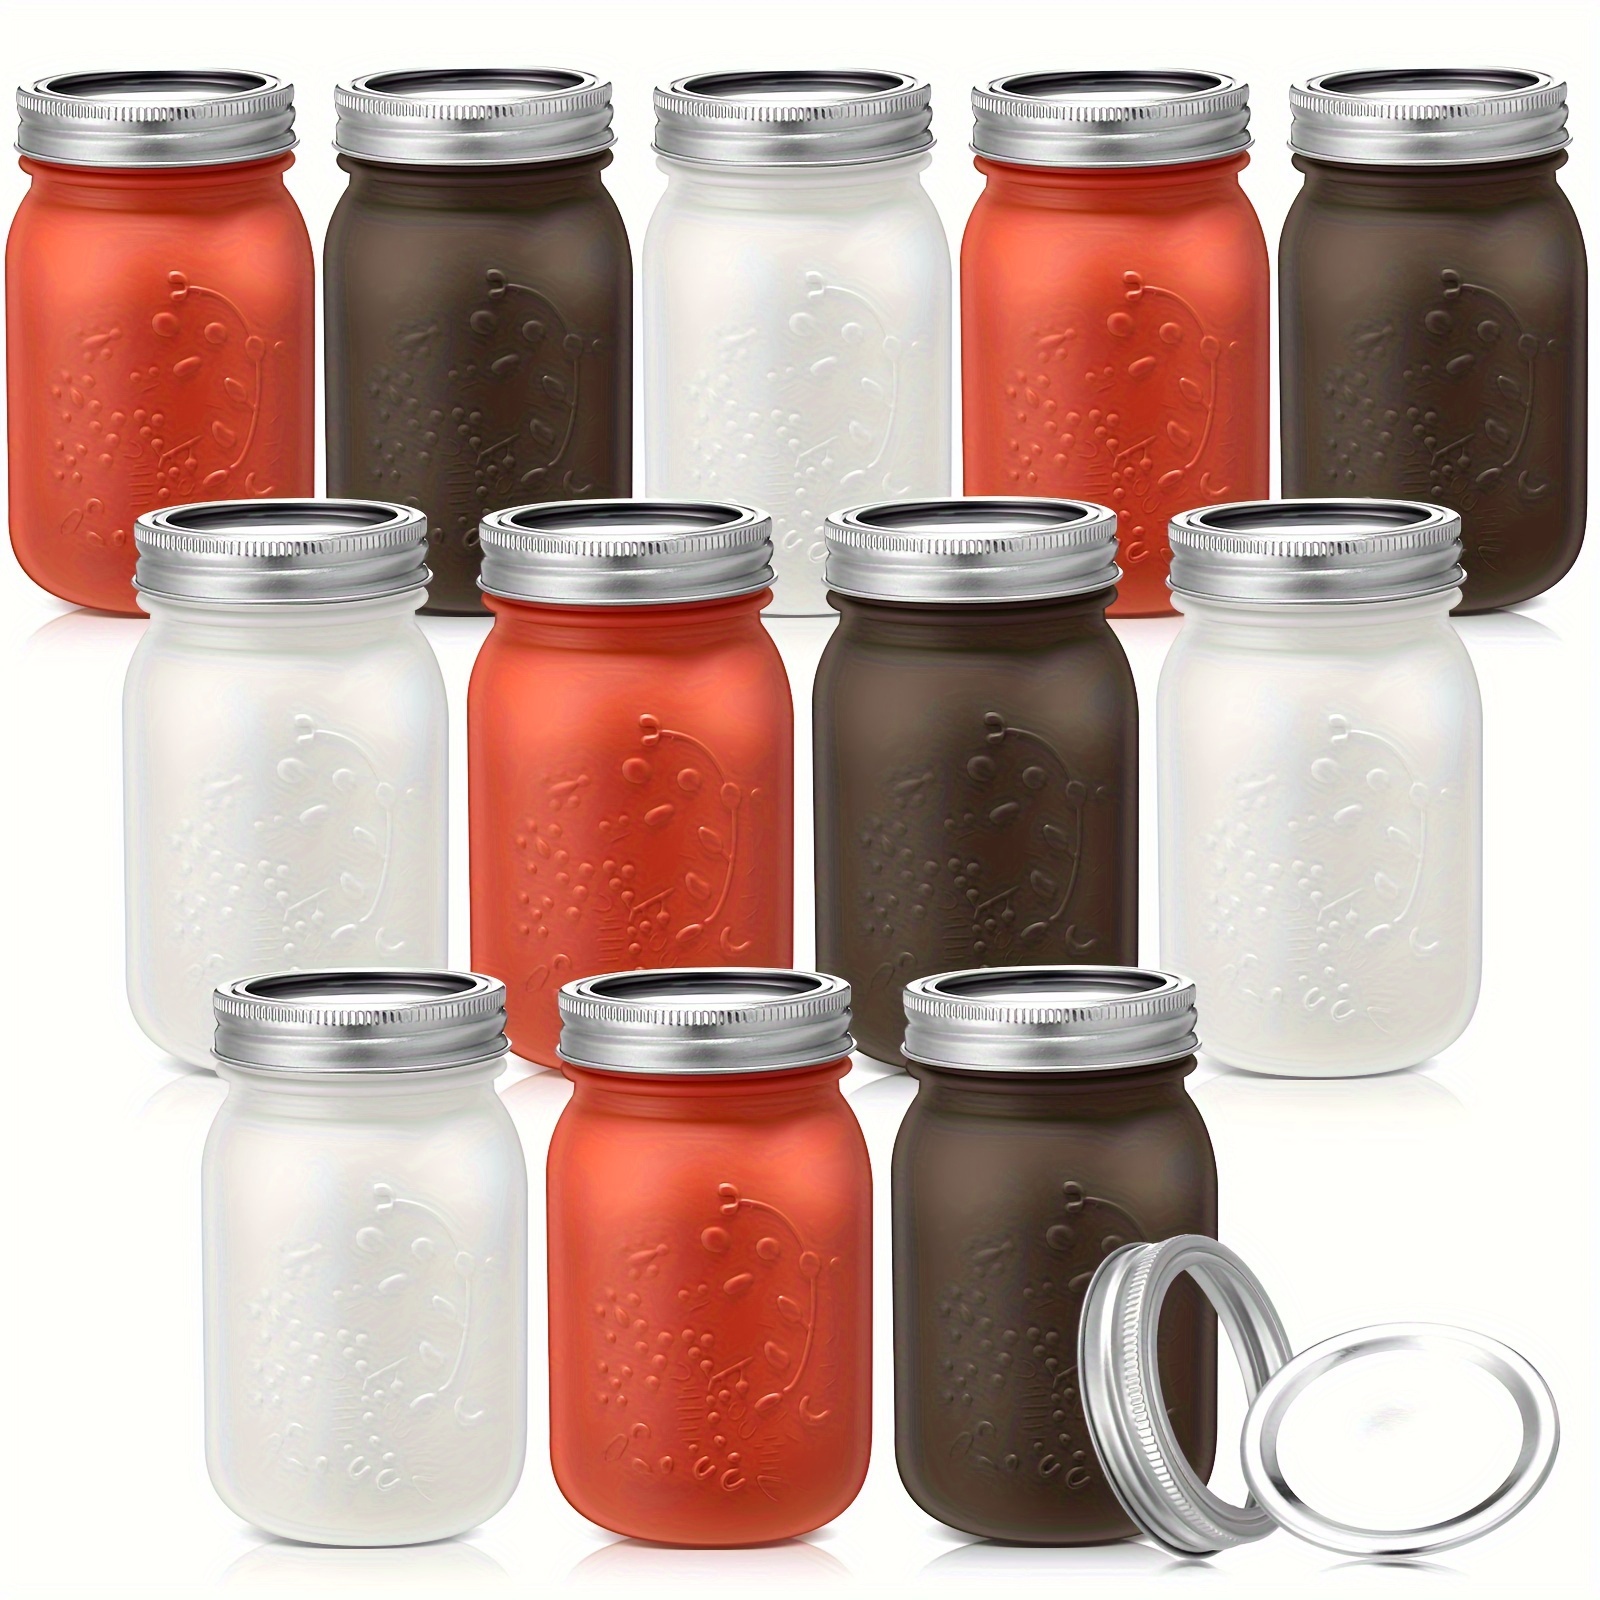 

12 Pack 16 Oz Fall Mason Canning Jars With Lids Regular Mouth Pint Vintage Colored Ball Cans For Preserving Jam Honey Jelly Sauces Spice Diy Jars Autumn Theme Ornament Gifts, 3 Colors